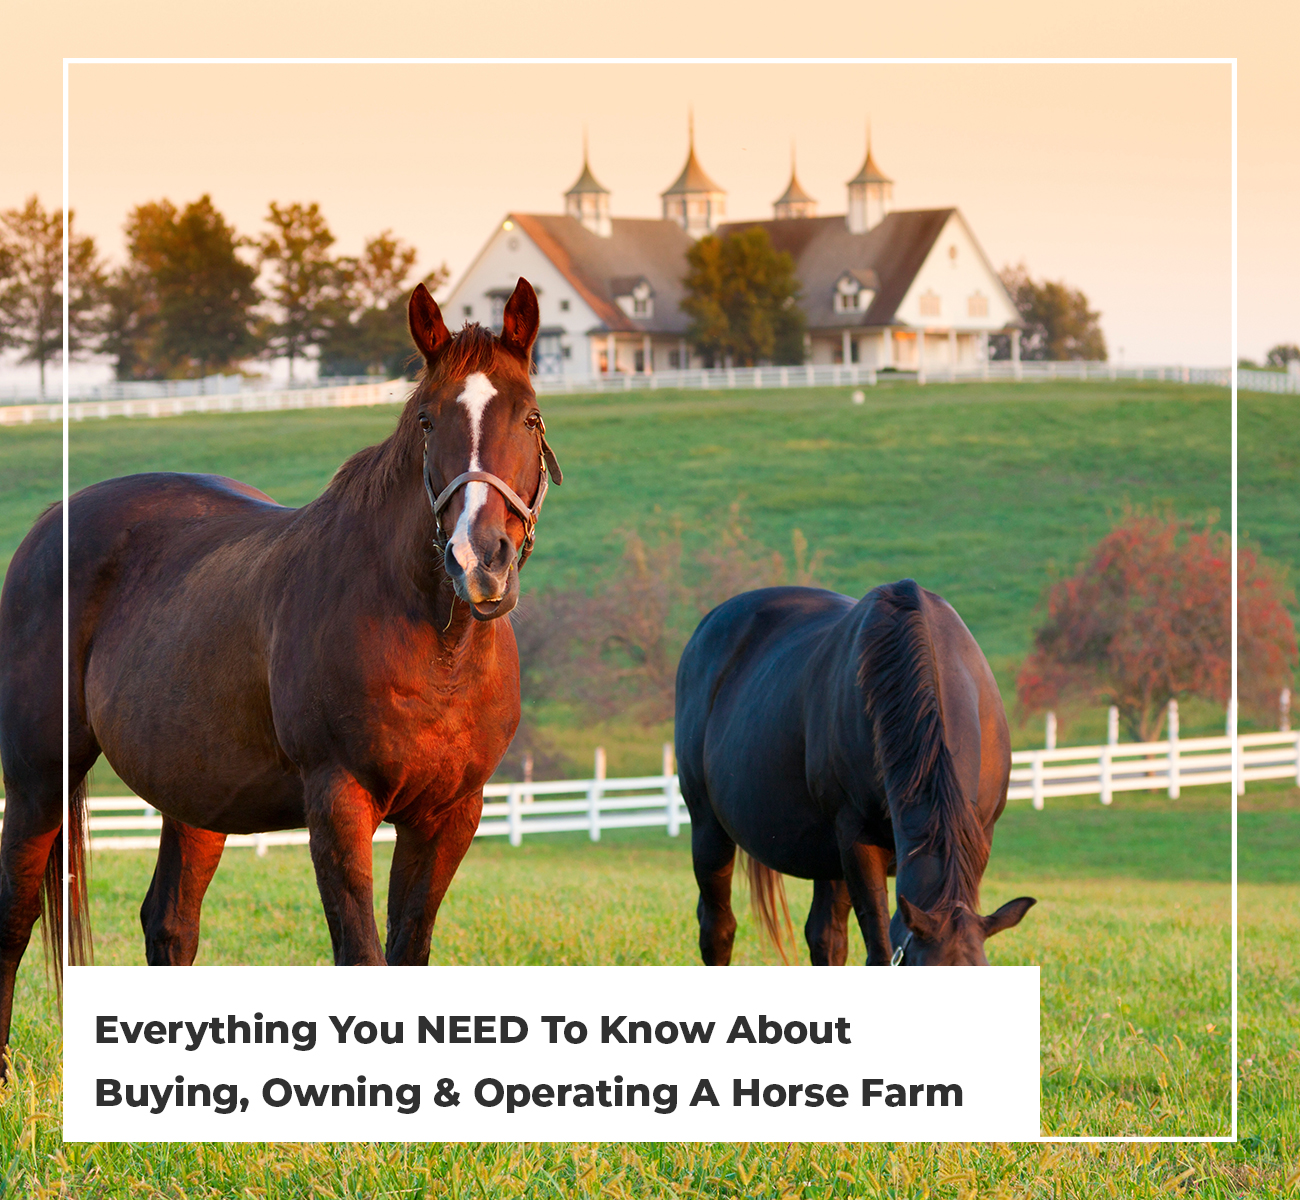 Everything You NEED To Know About Buying, Owning & Operating A Horse Farm - Main Image